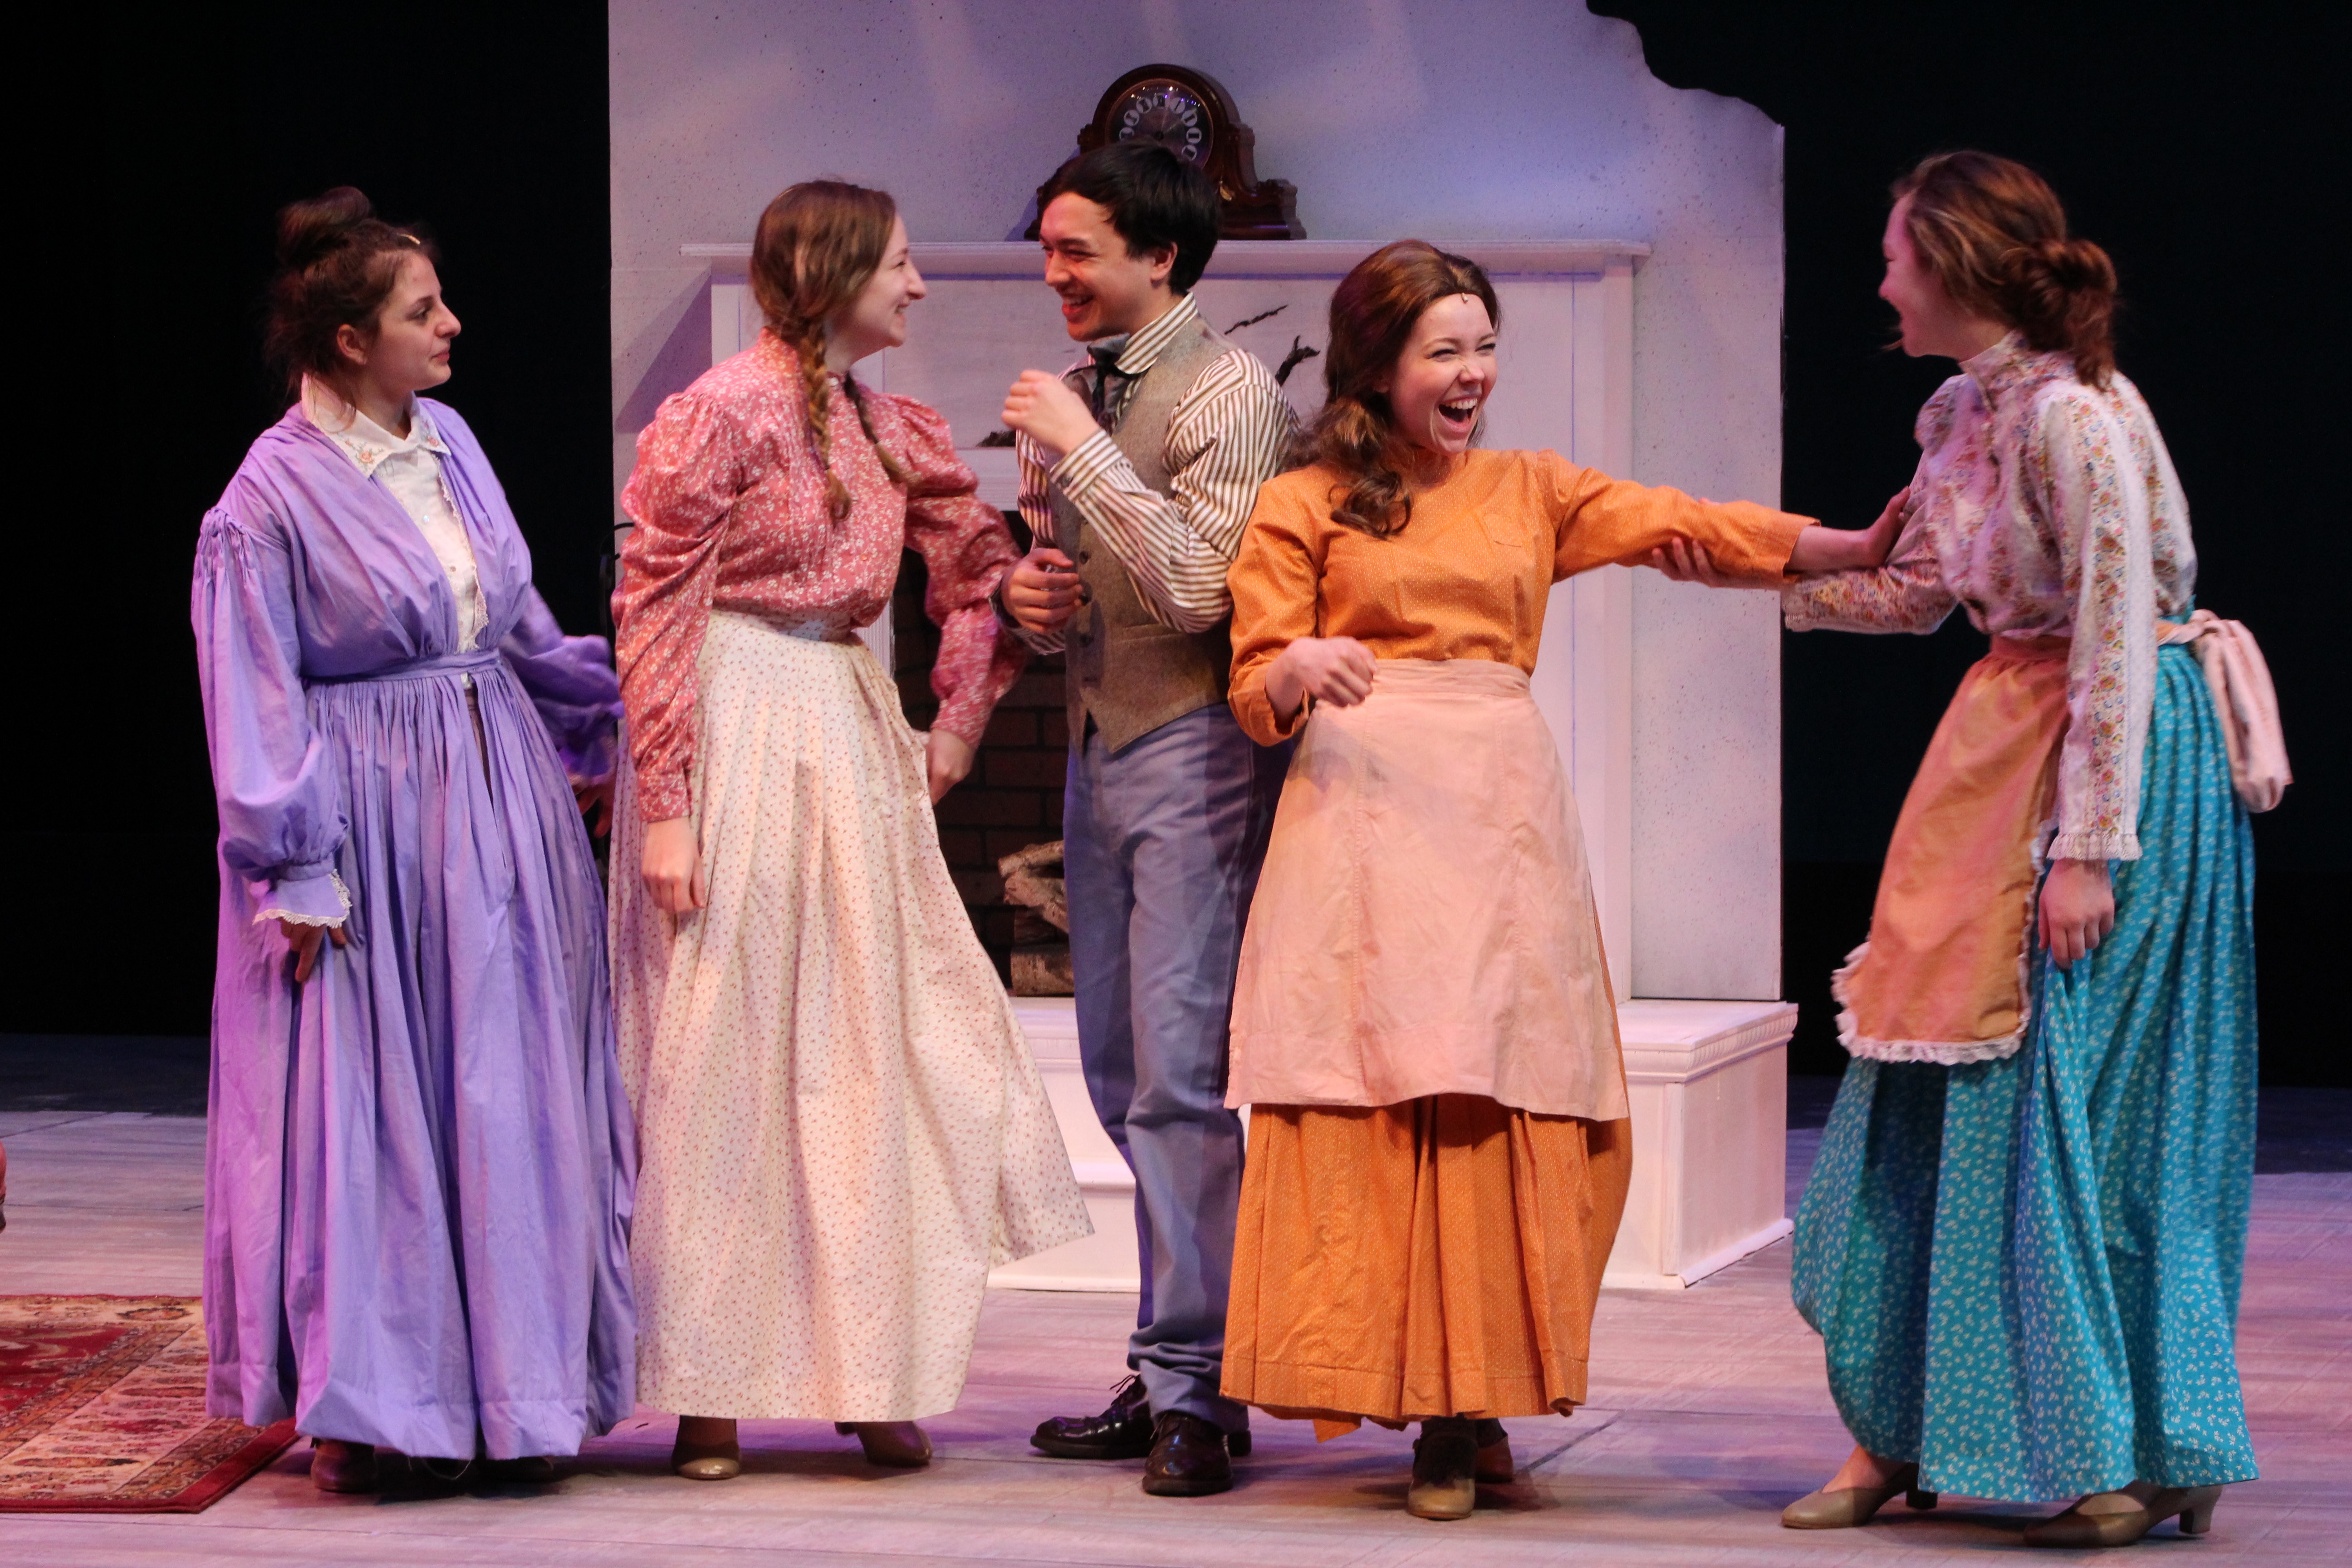 Tower Players ‘Little Women’ brings fresh take to campus